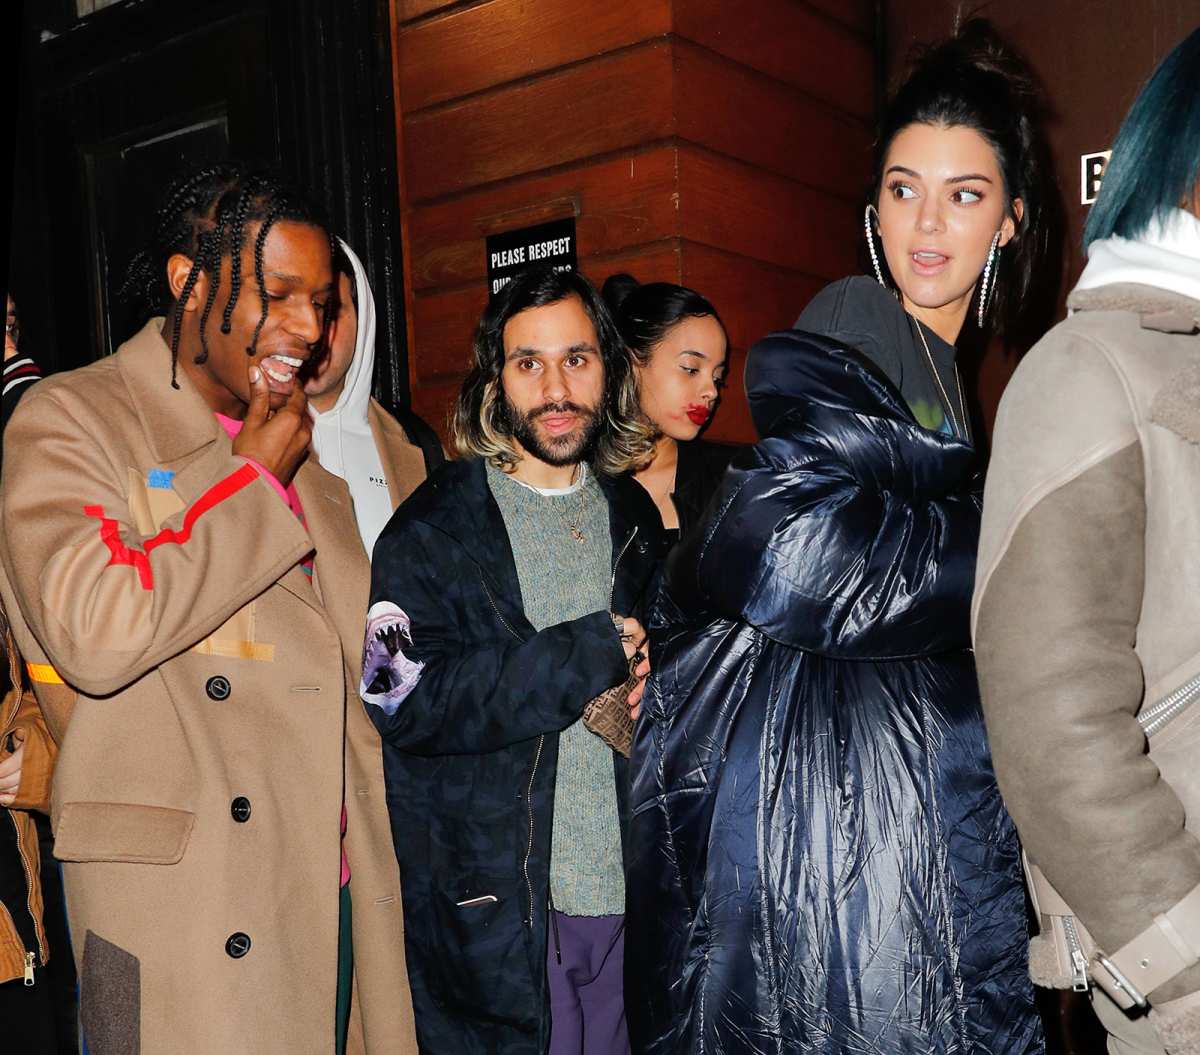 Kendall Jenner & A$AP Rocky dating: Relationship News & Pictures